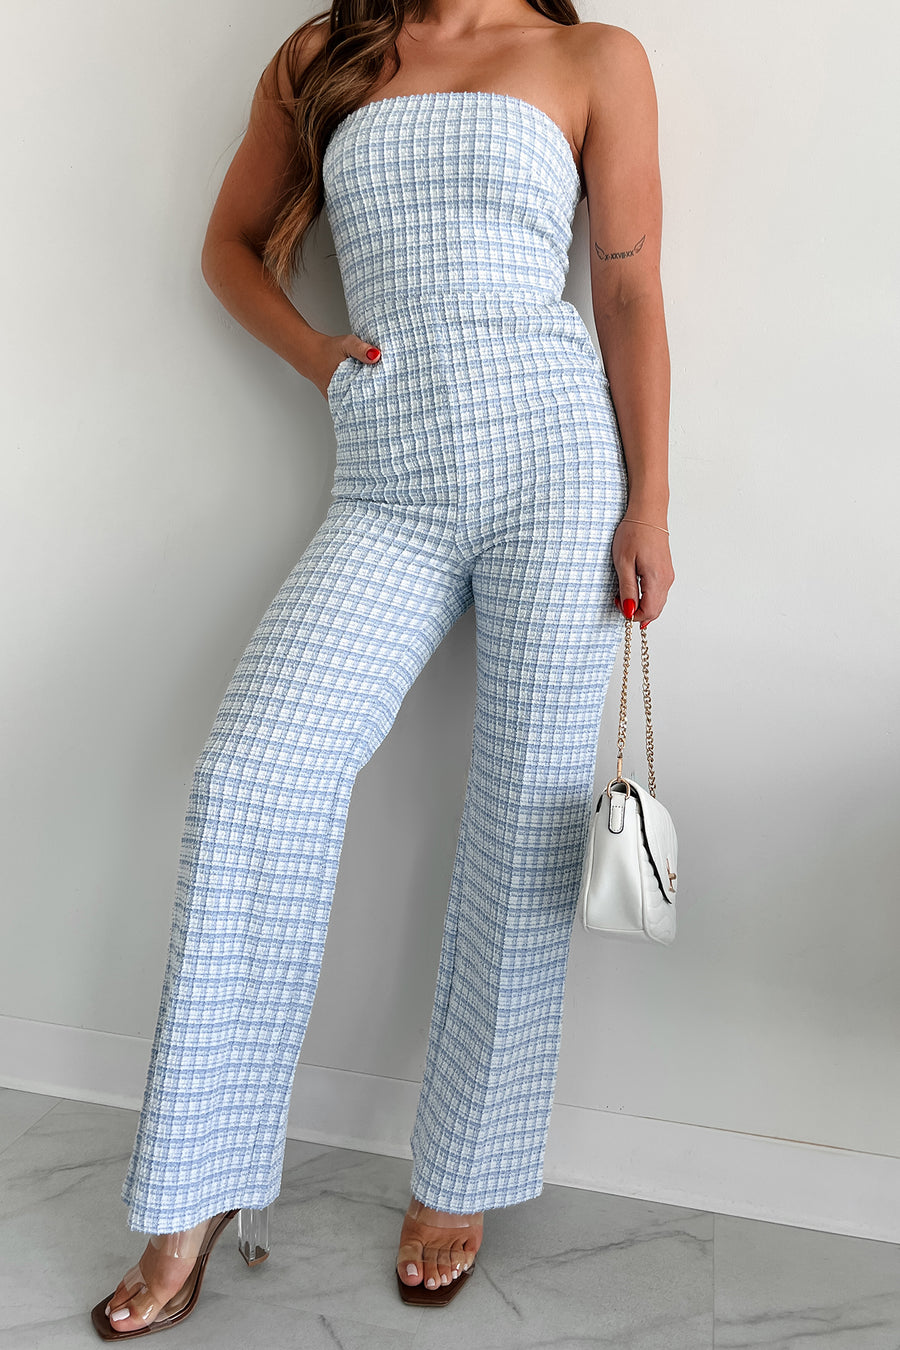 Influential Position Stretchy Tweed Jumpsuit (Ivory/Blue) - NanaMacs